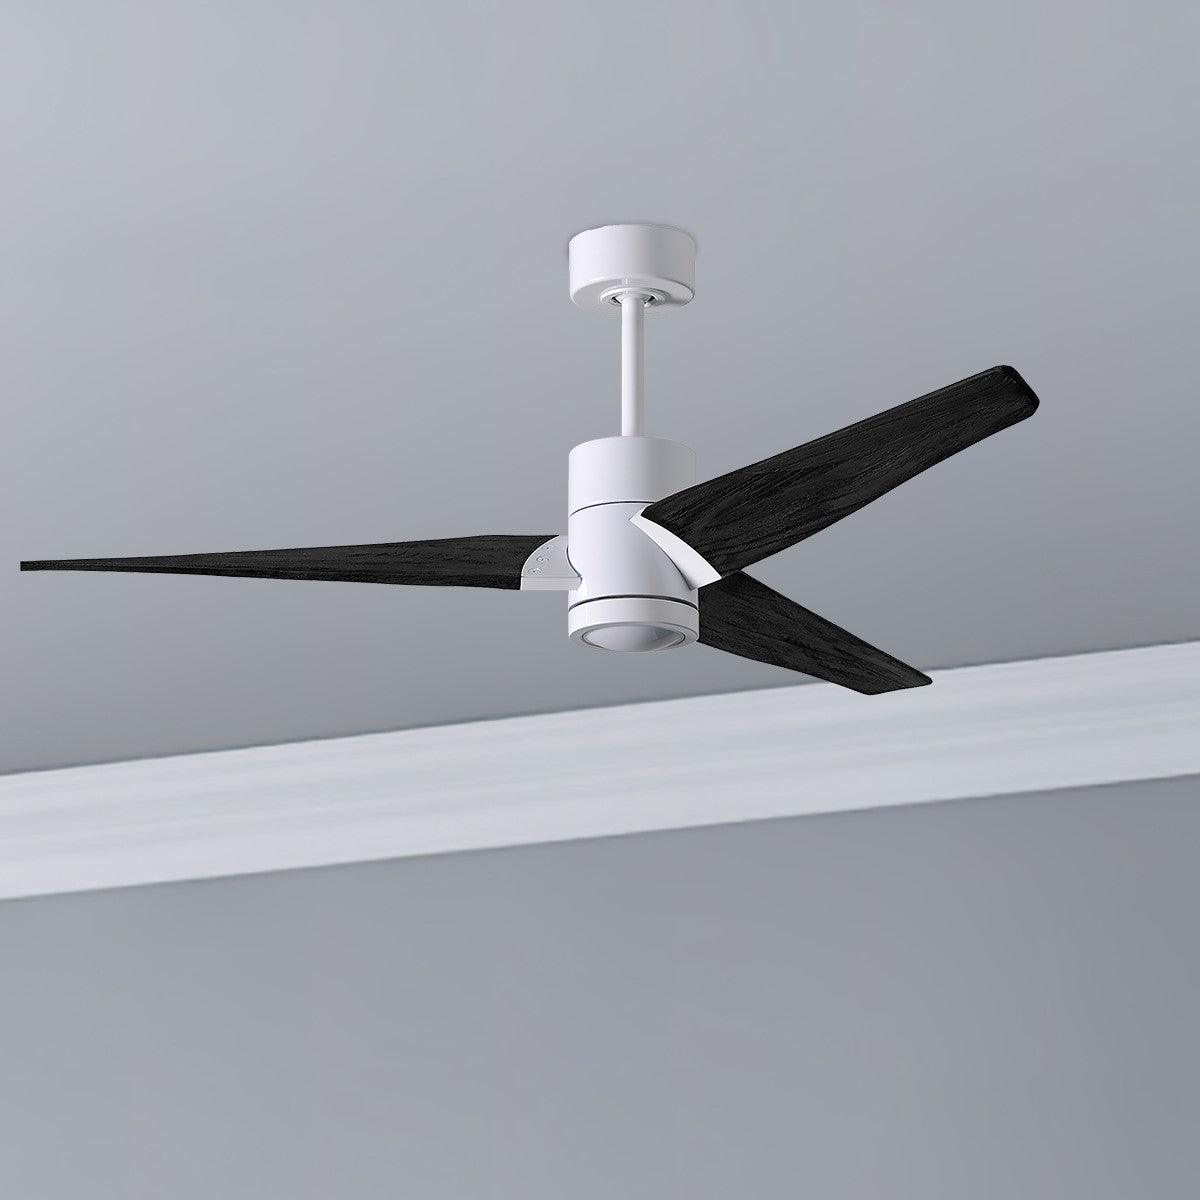 Matthews Fan Company Super Janet 60 Inch Outdoor Ceiling With Light Wall And Remote Control Included Bees Lighting